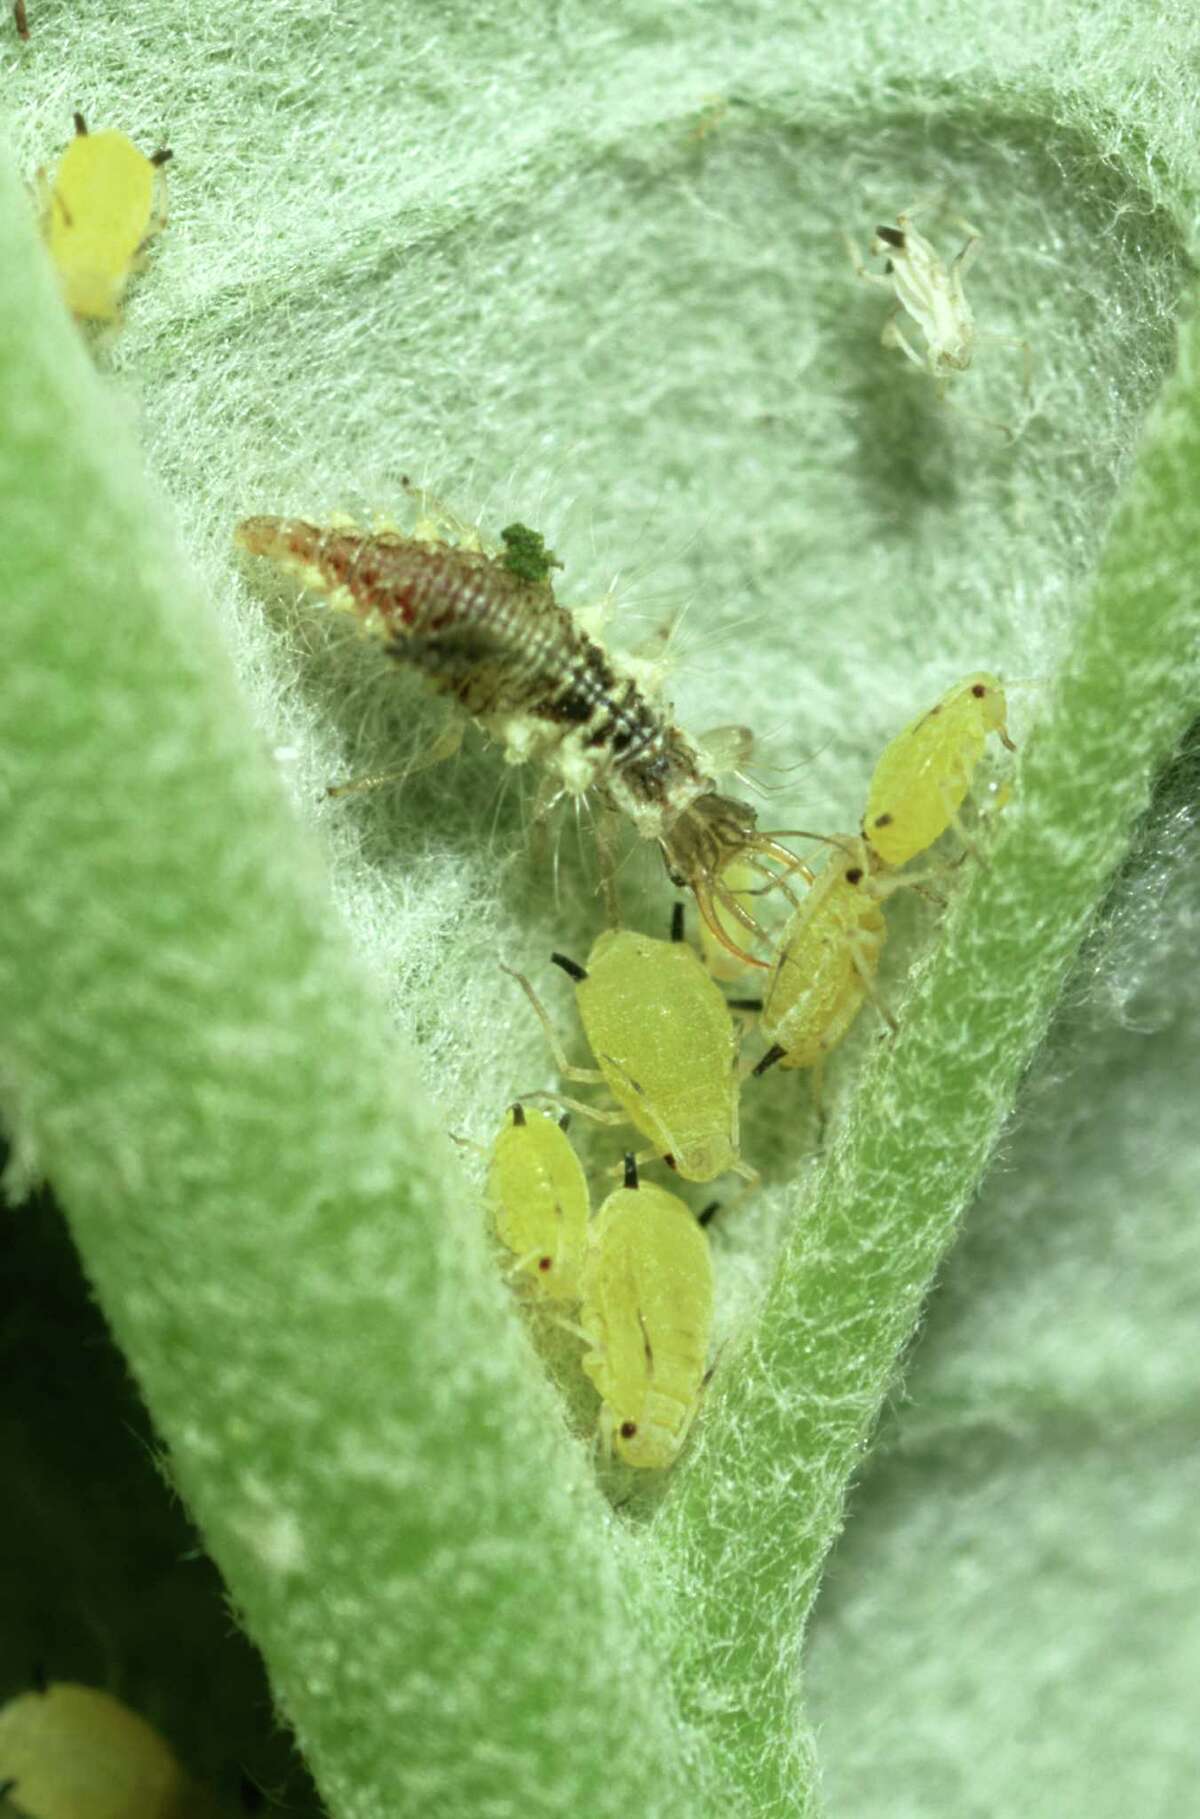 A lacewing larva uses its hollow pincerlike mandibles to suck juices out of aphids.